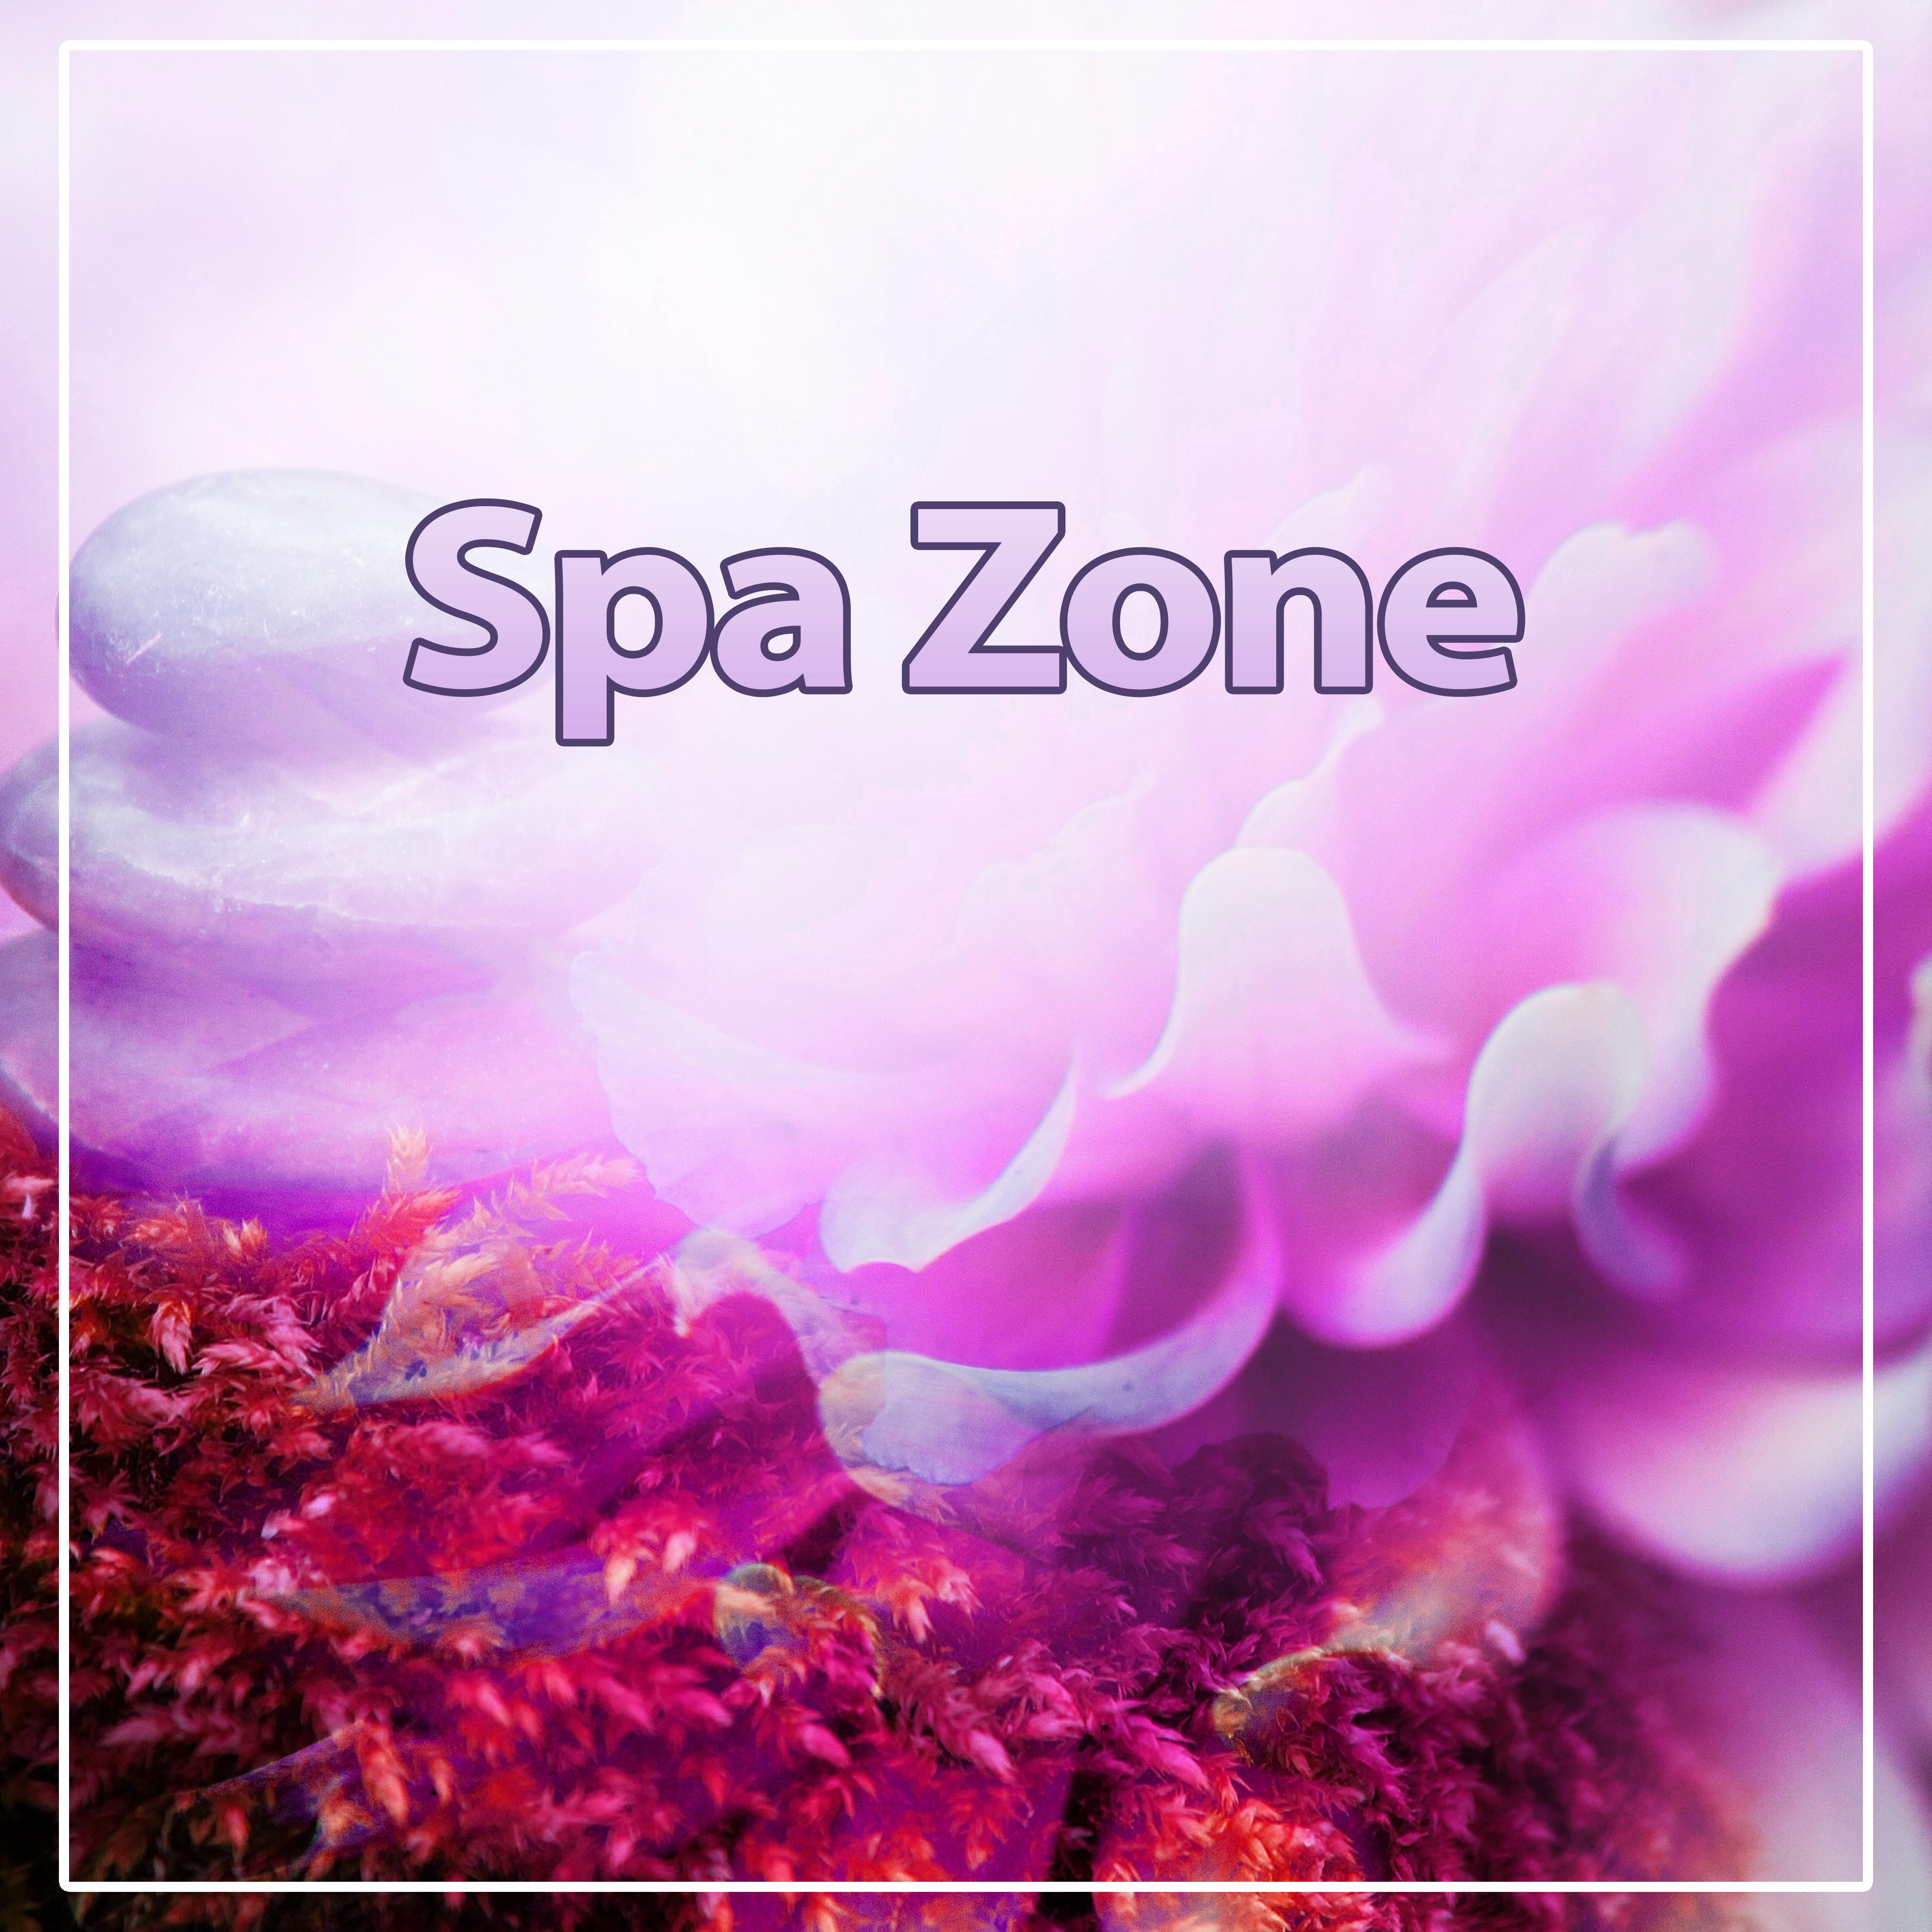 Spa Zone - Sounds of Nature, Zen Spa, Pure Relaxation, Healing Therapy, Soft Music, Peaceful Sounds